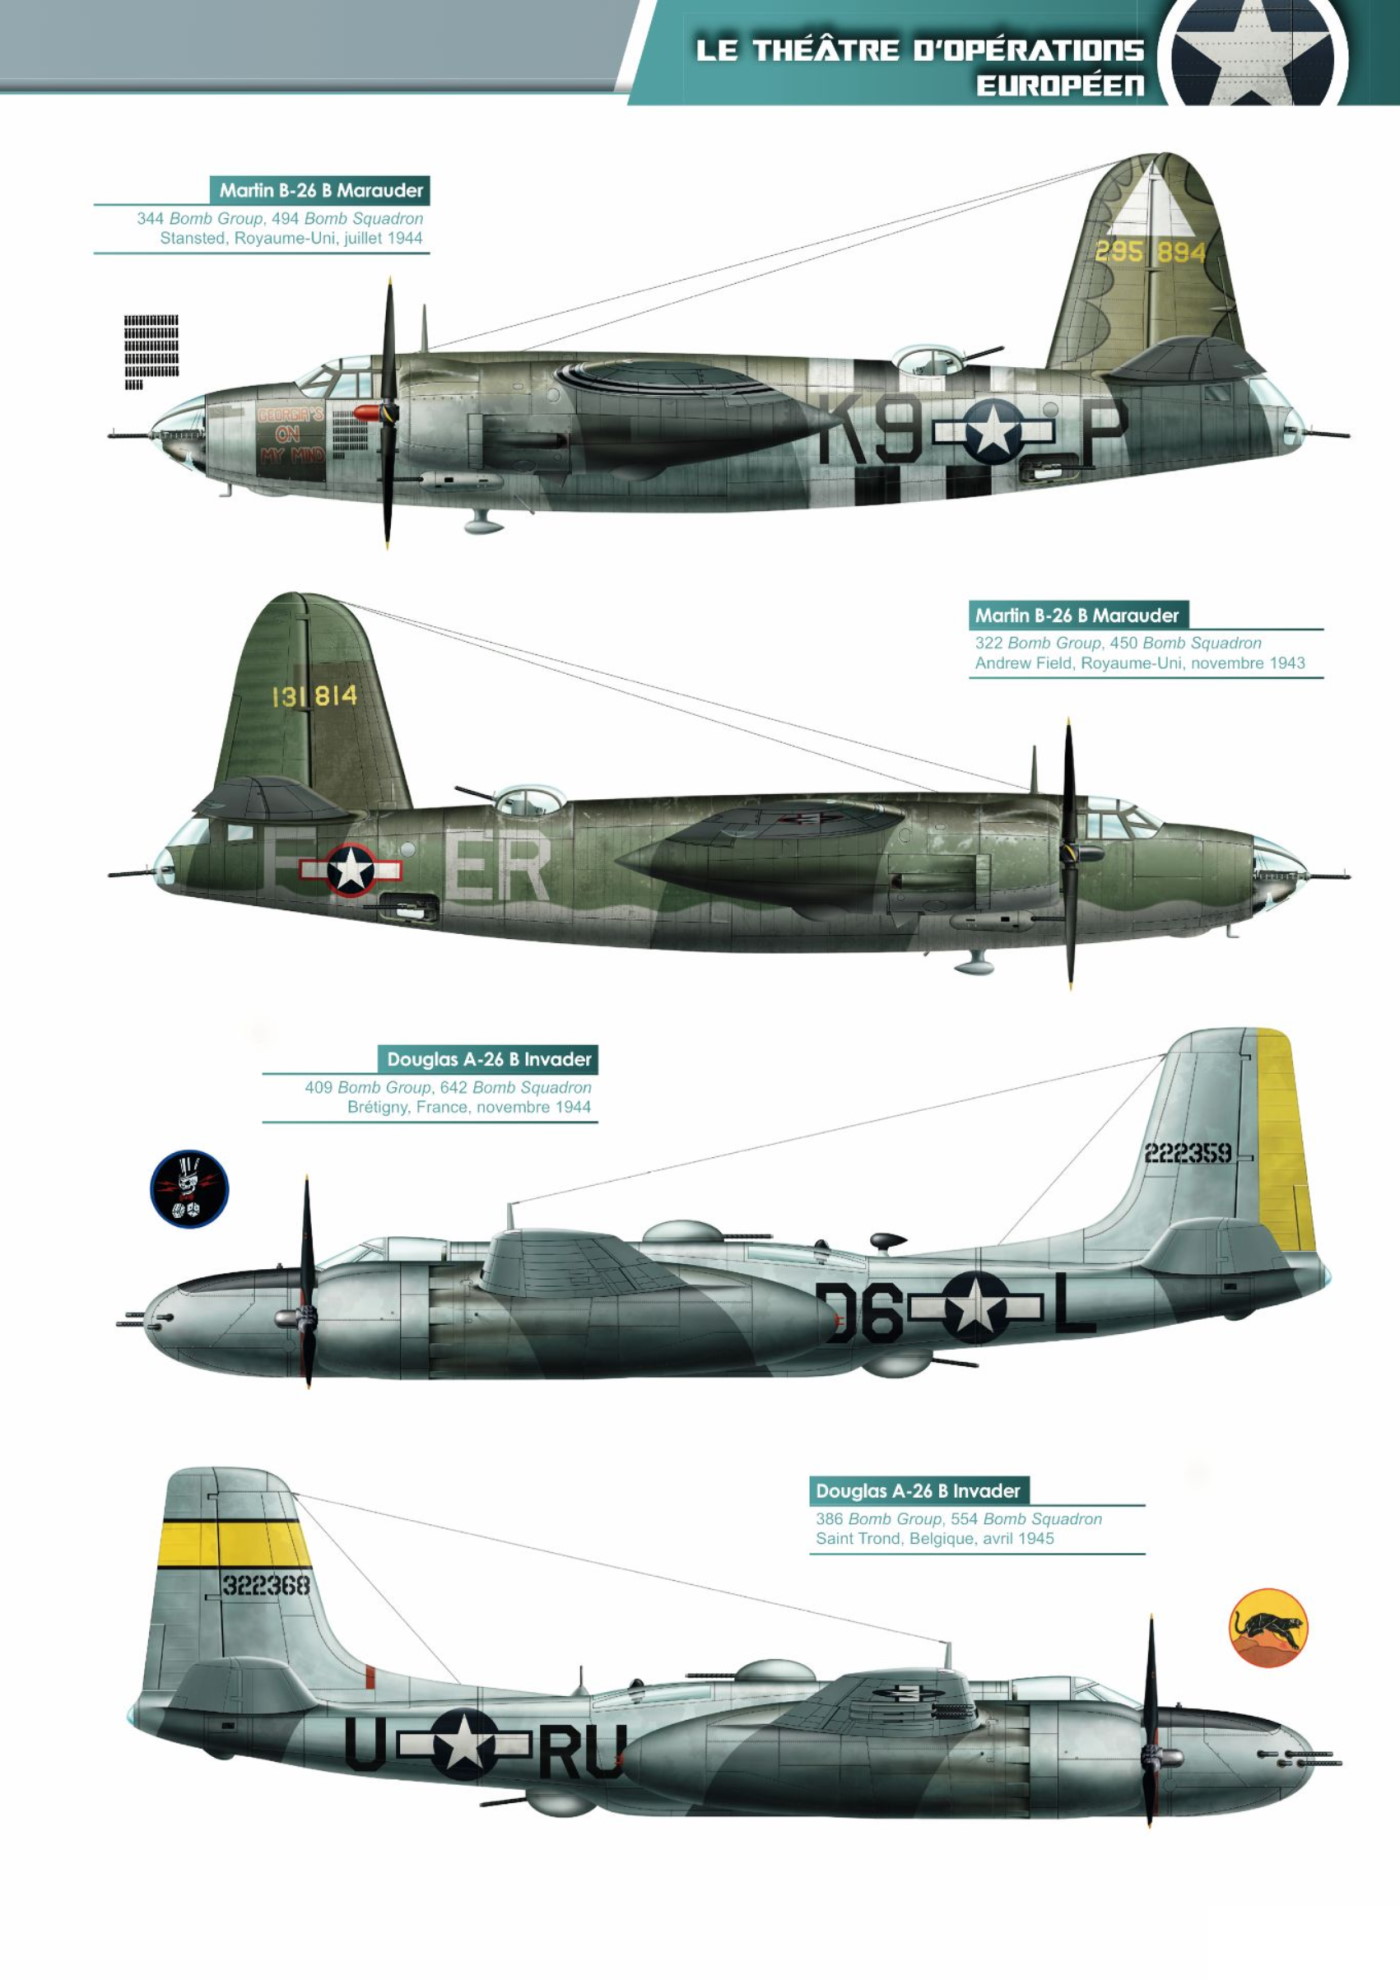 The Most Mass-Produced American Bomber Planes of WWII - 24/7 Wall St.